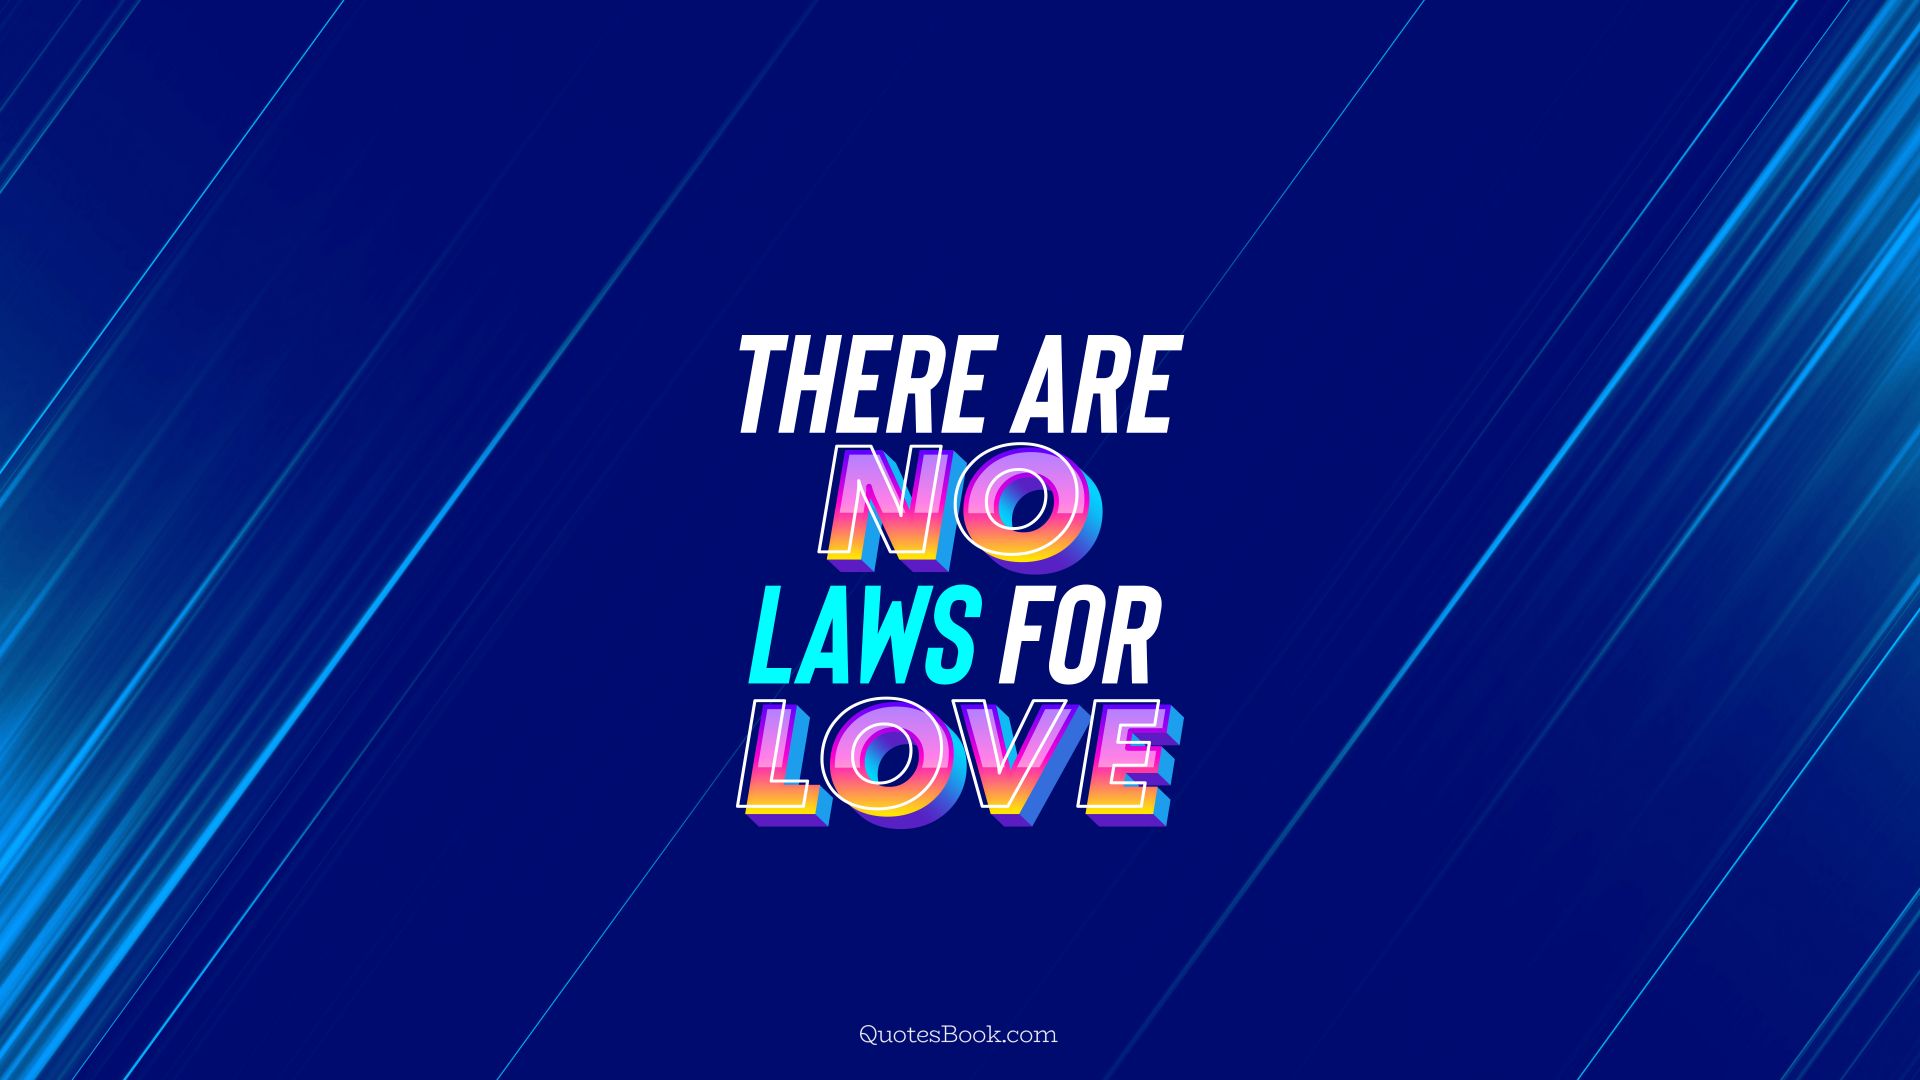 There are no laws for love. - Quote by QuotesBook